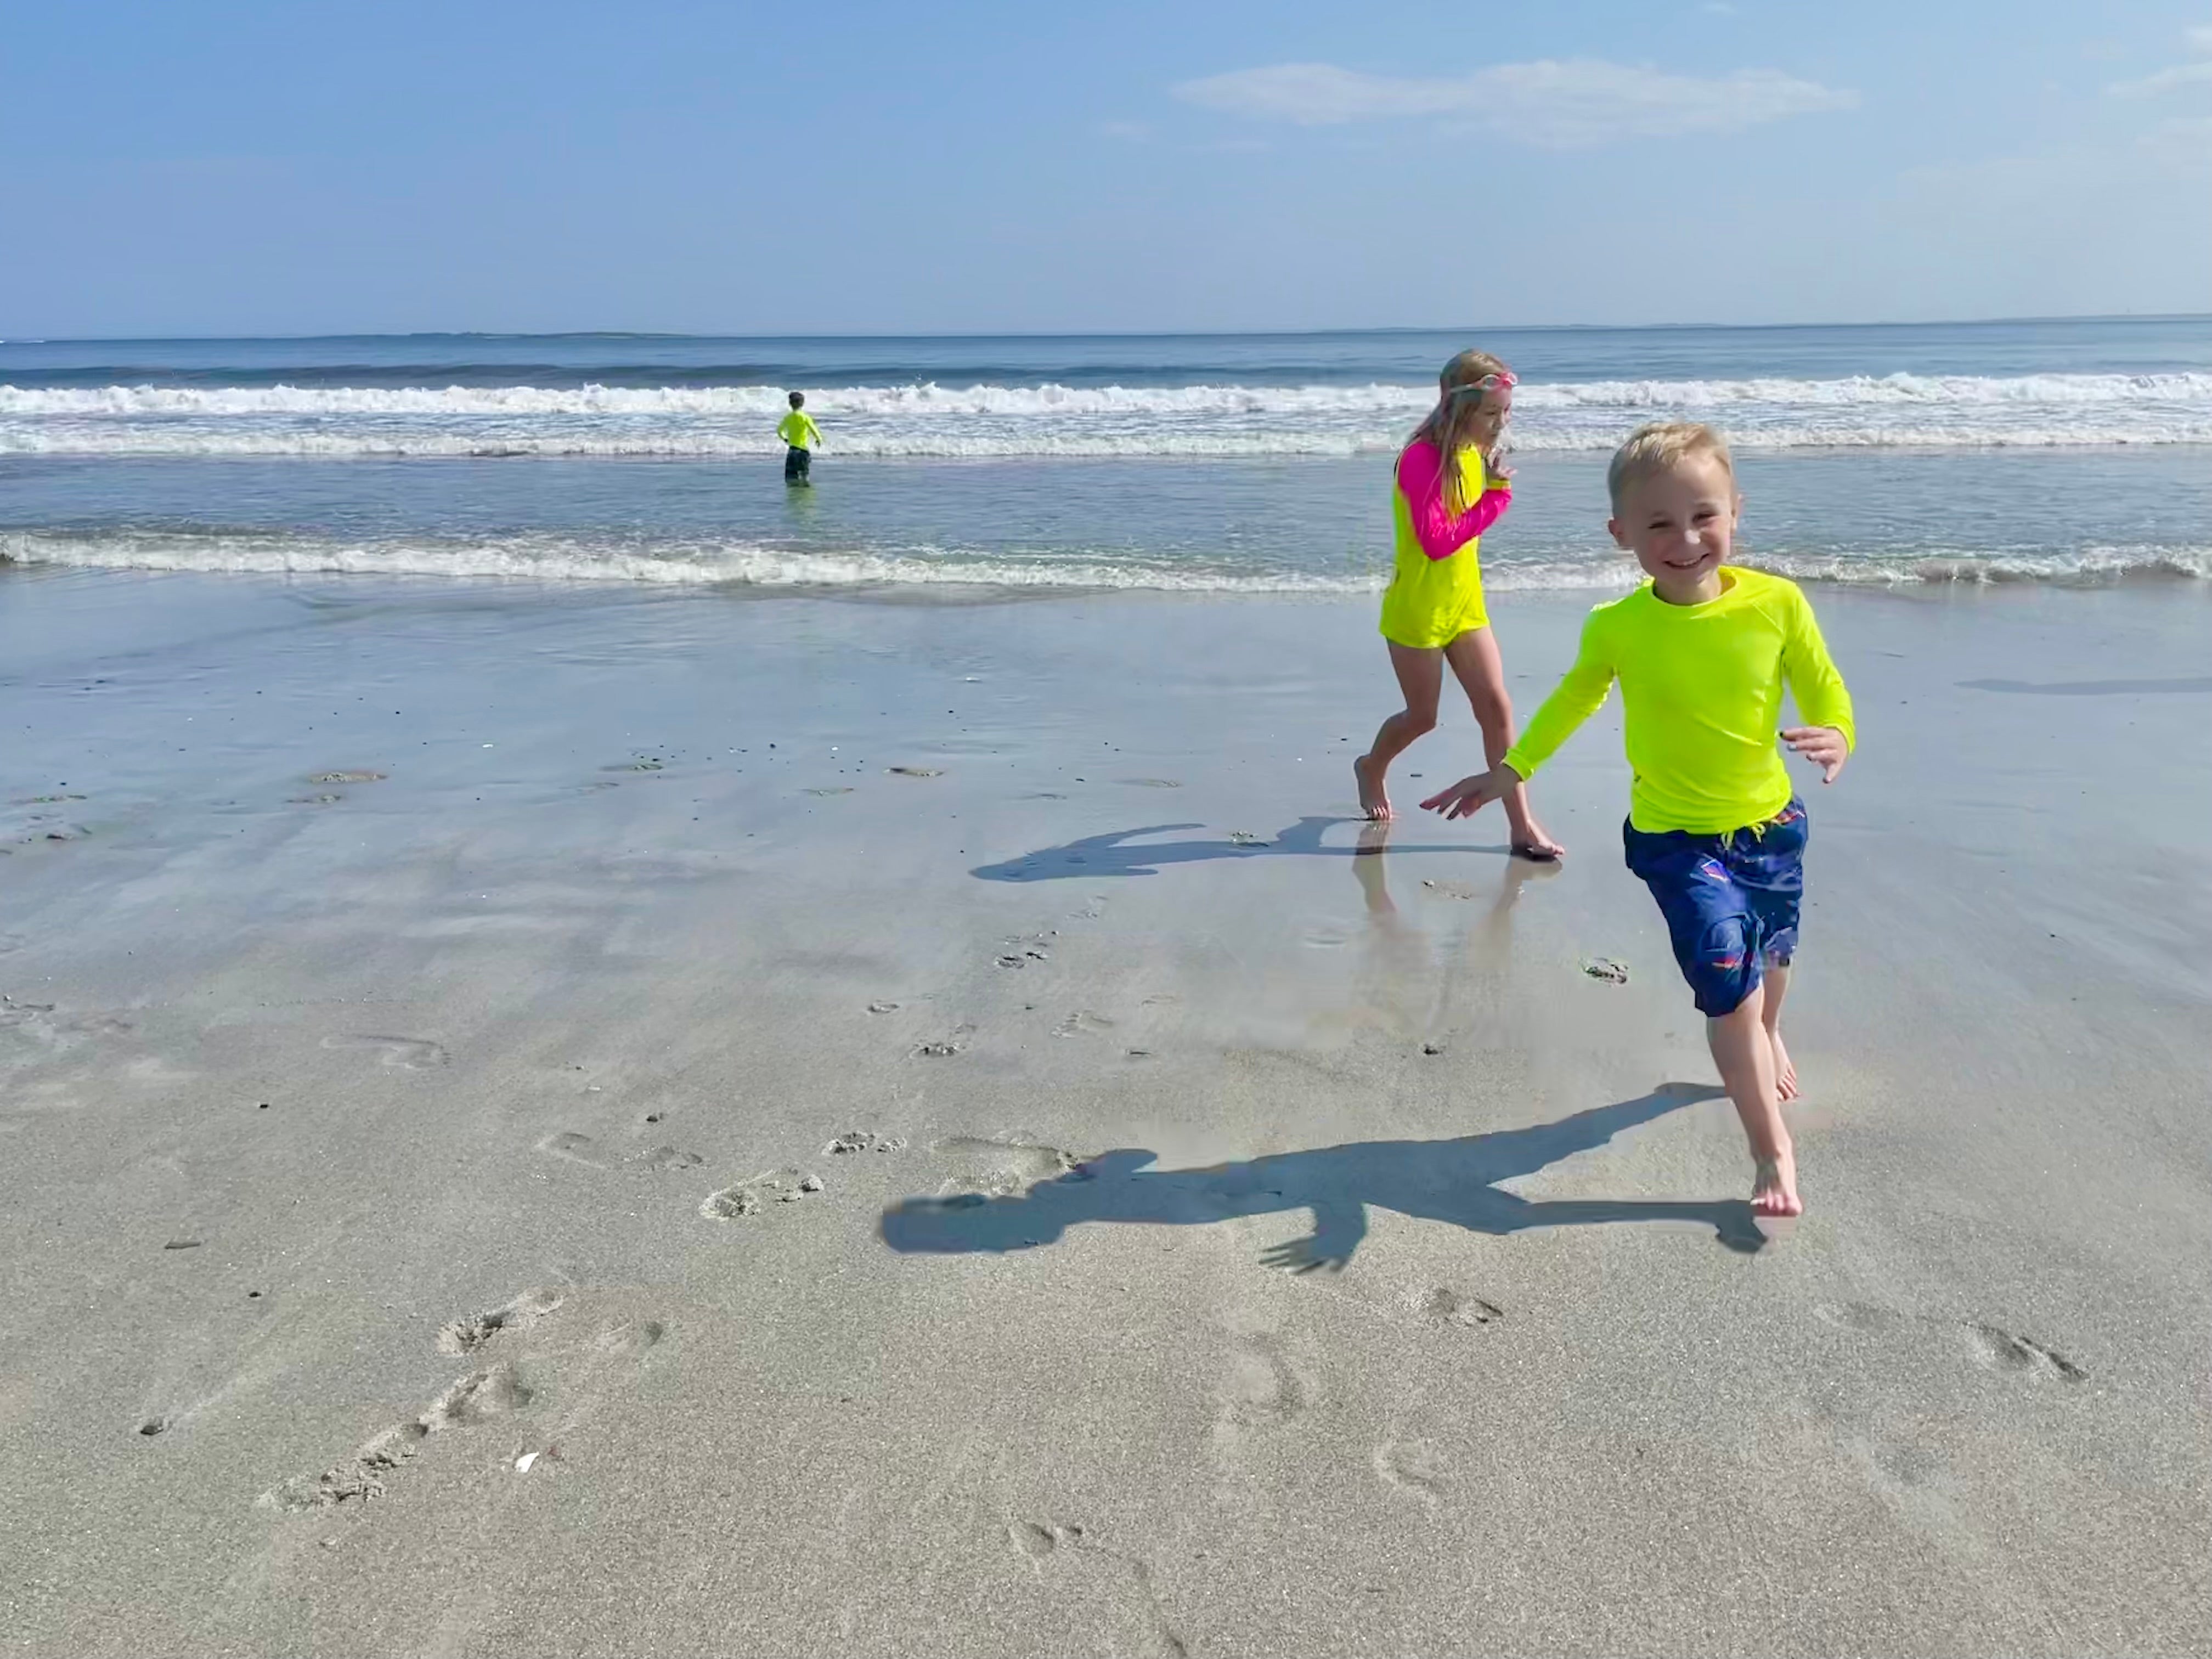 A boy running on the beach in a neon yellow rash guard being chased by his sister also wearing a neon yellow rash guard with neon pink sleeves.